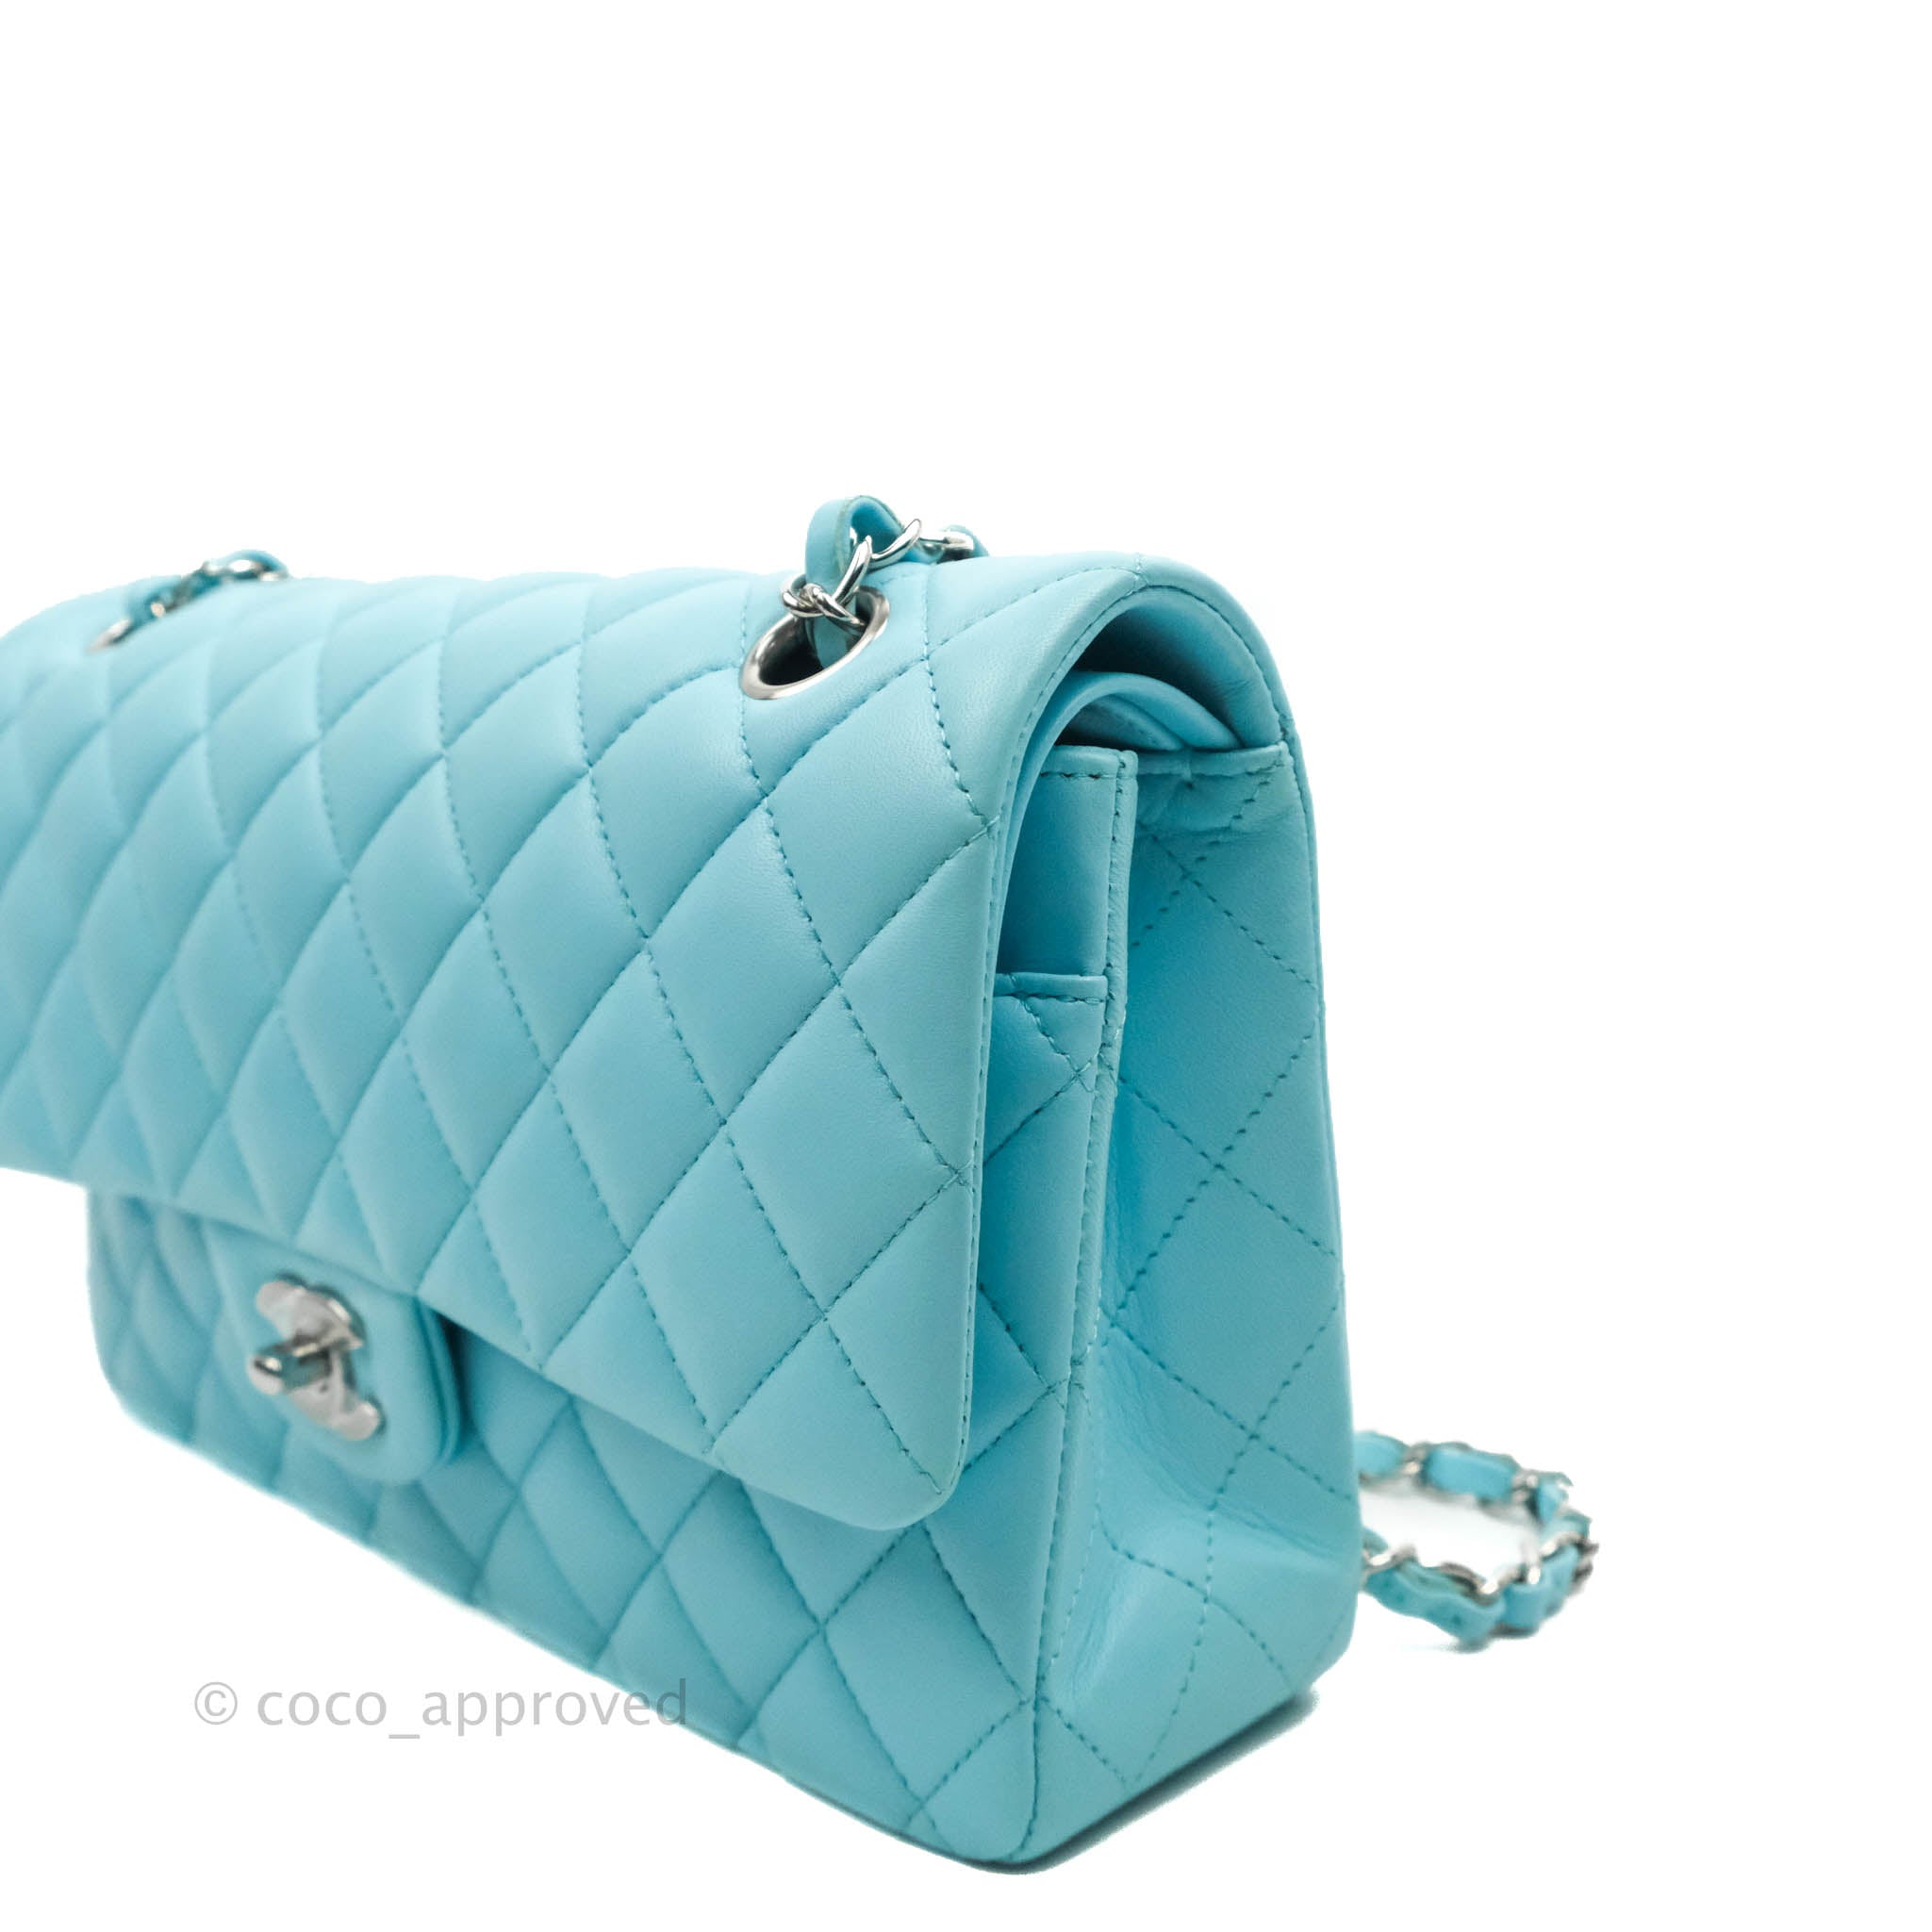 Lambskin Quilted Medium Double Flap Light Blue – Trends Luxe